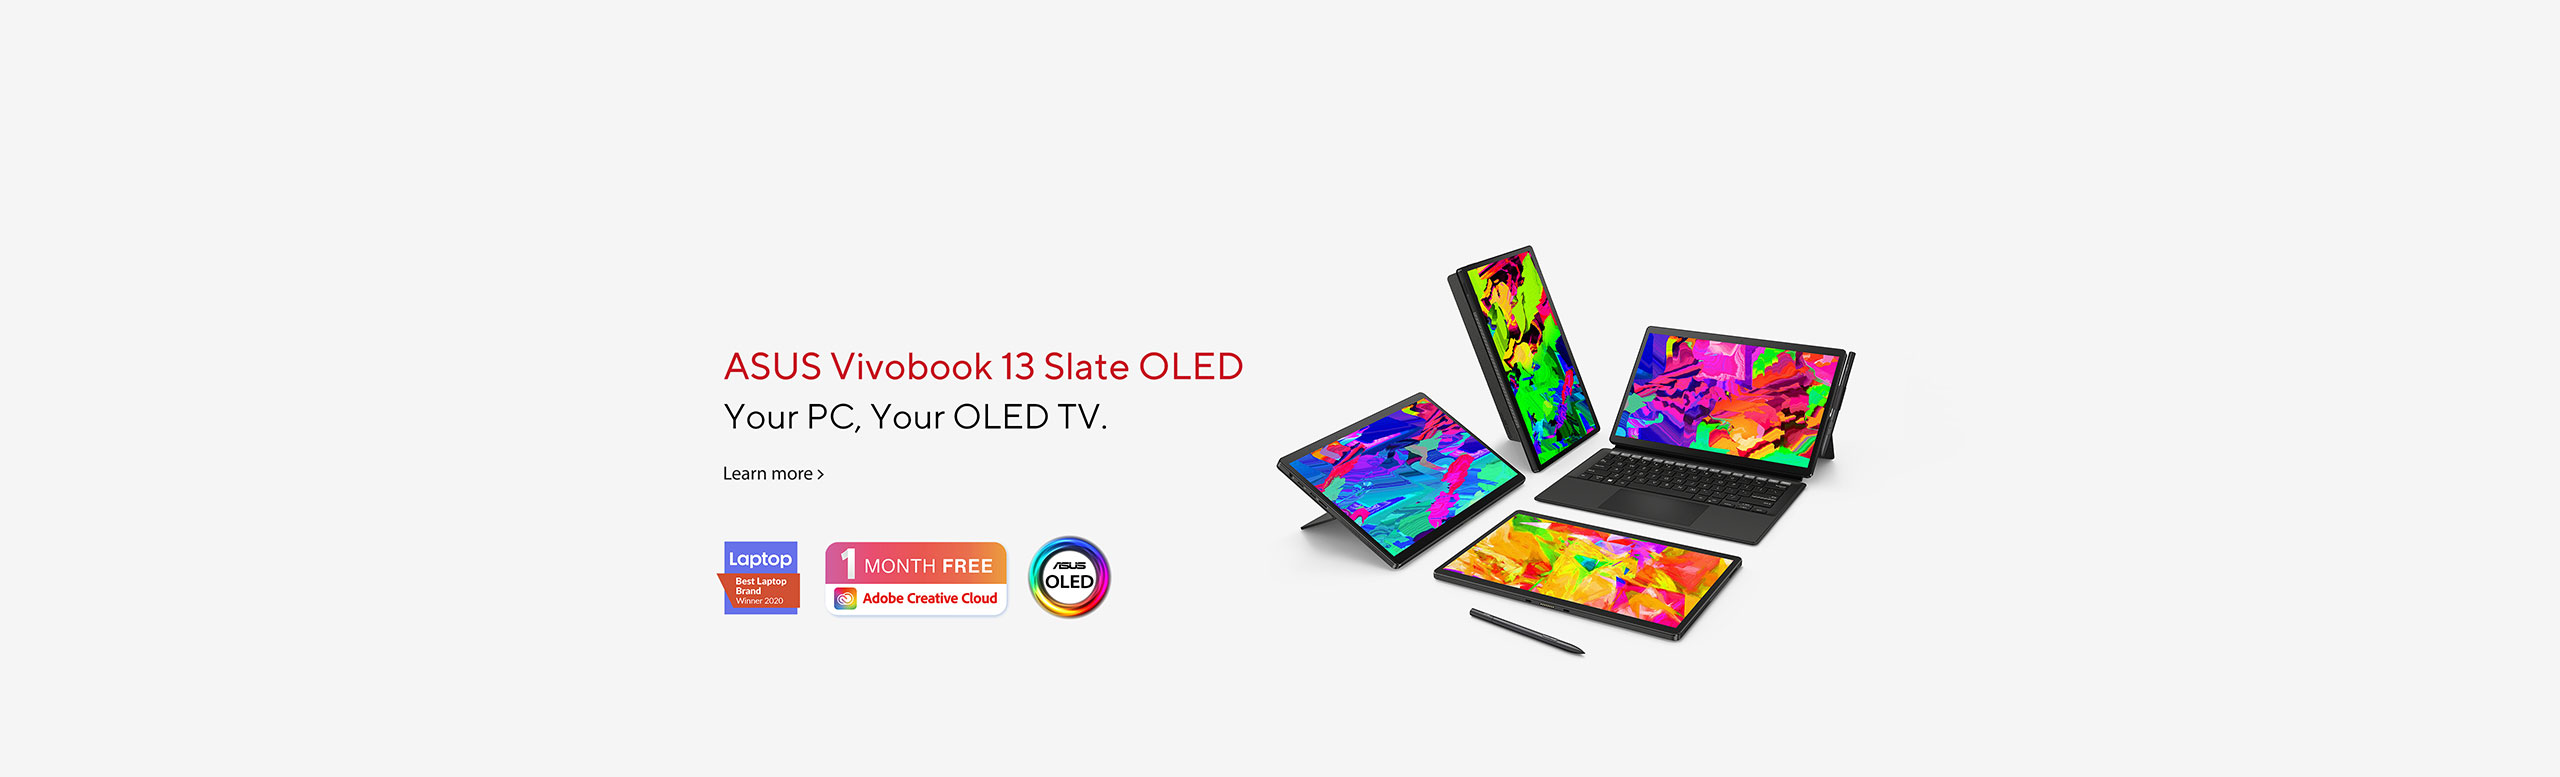 Vivobook 13 Slate OLED presenting in tablet mode, laptop mode, landscape stand mode and portrait stand mode, with ASUS OLED badge, best laptop brand winner 2020 and 1 month free Adobe Creative Cloud badge.